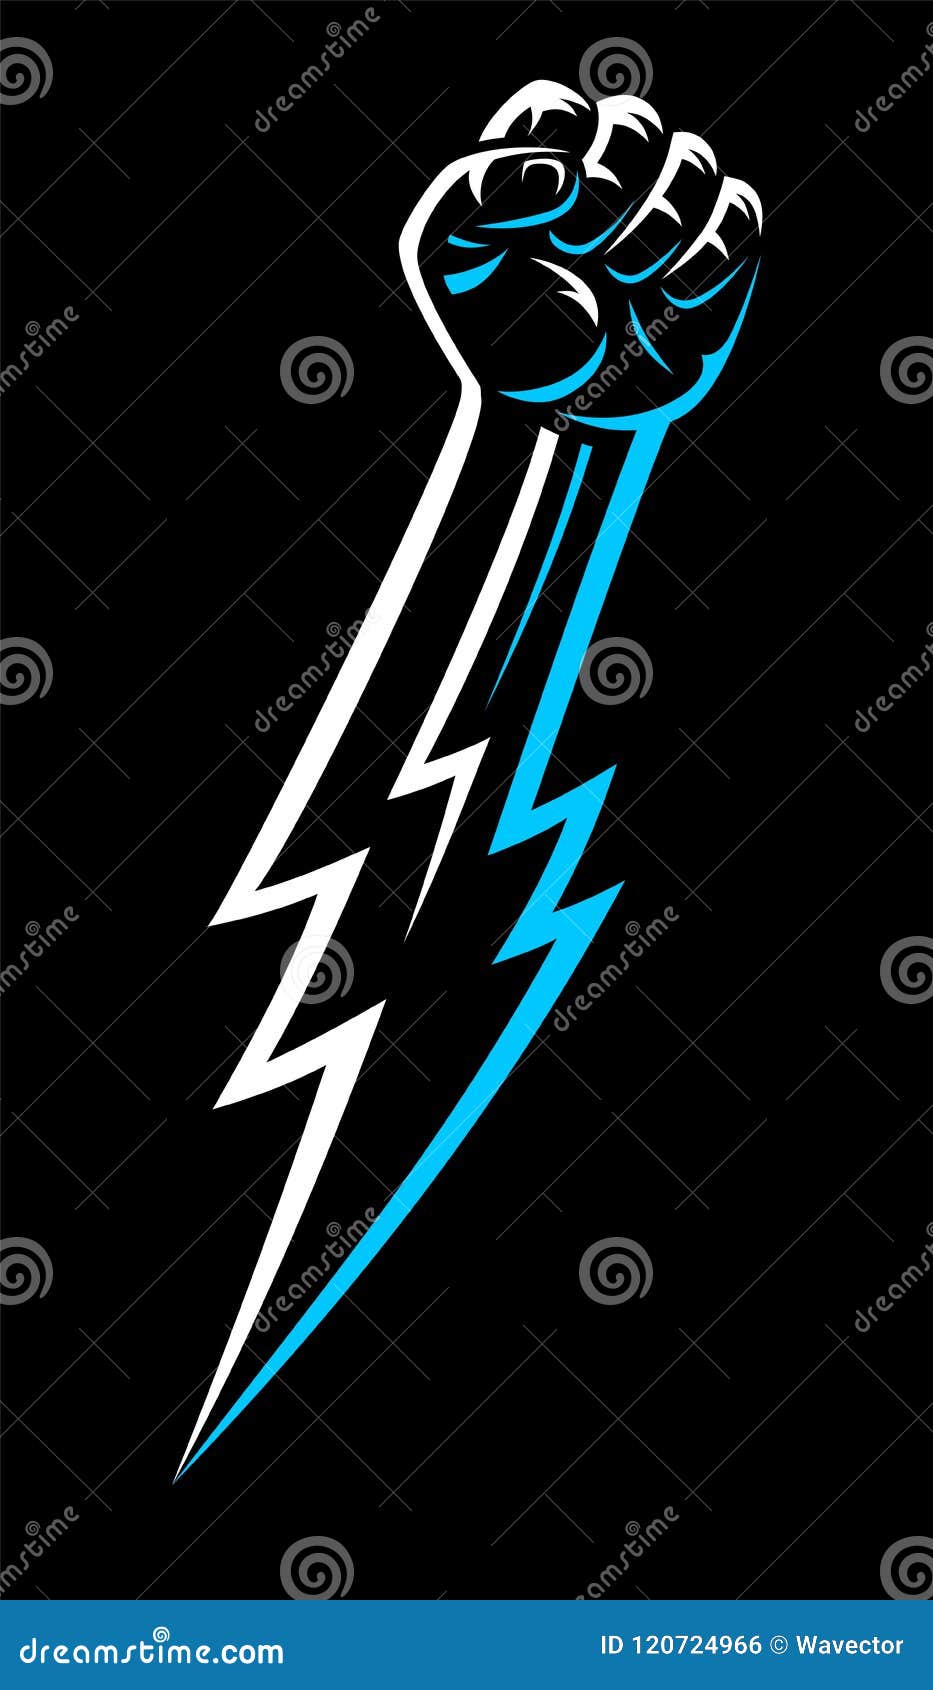 rebel clenched raised male fist hand lightning bolt